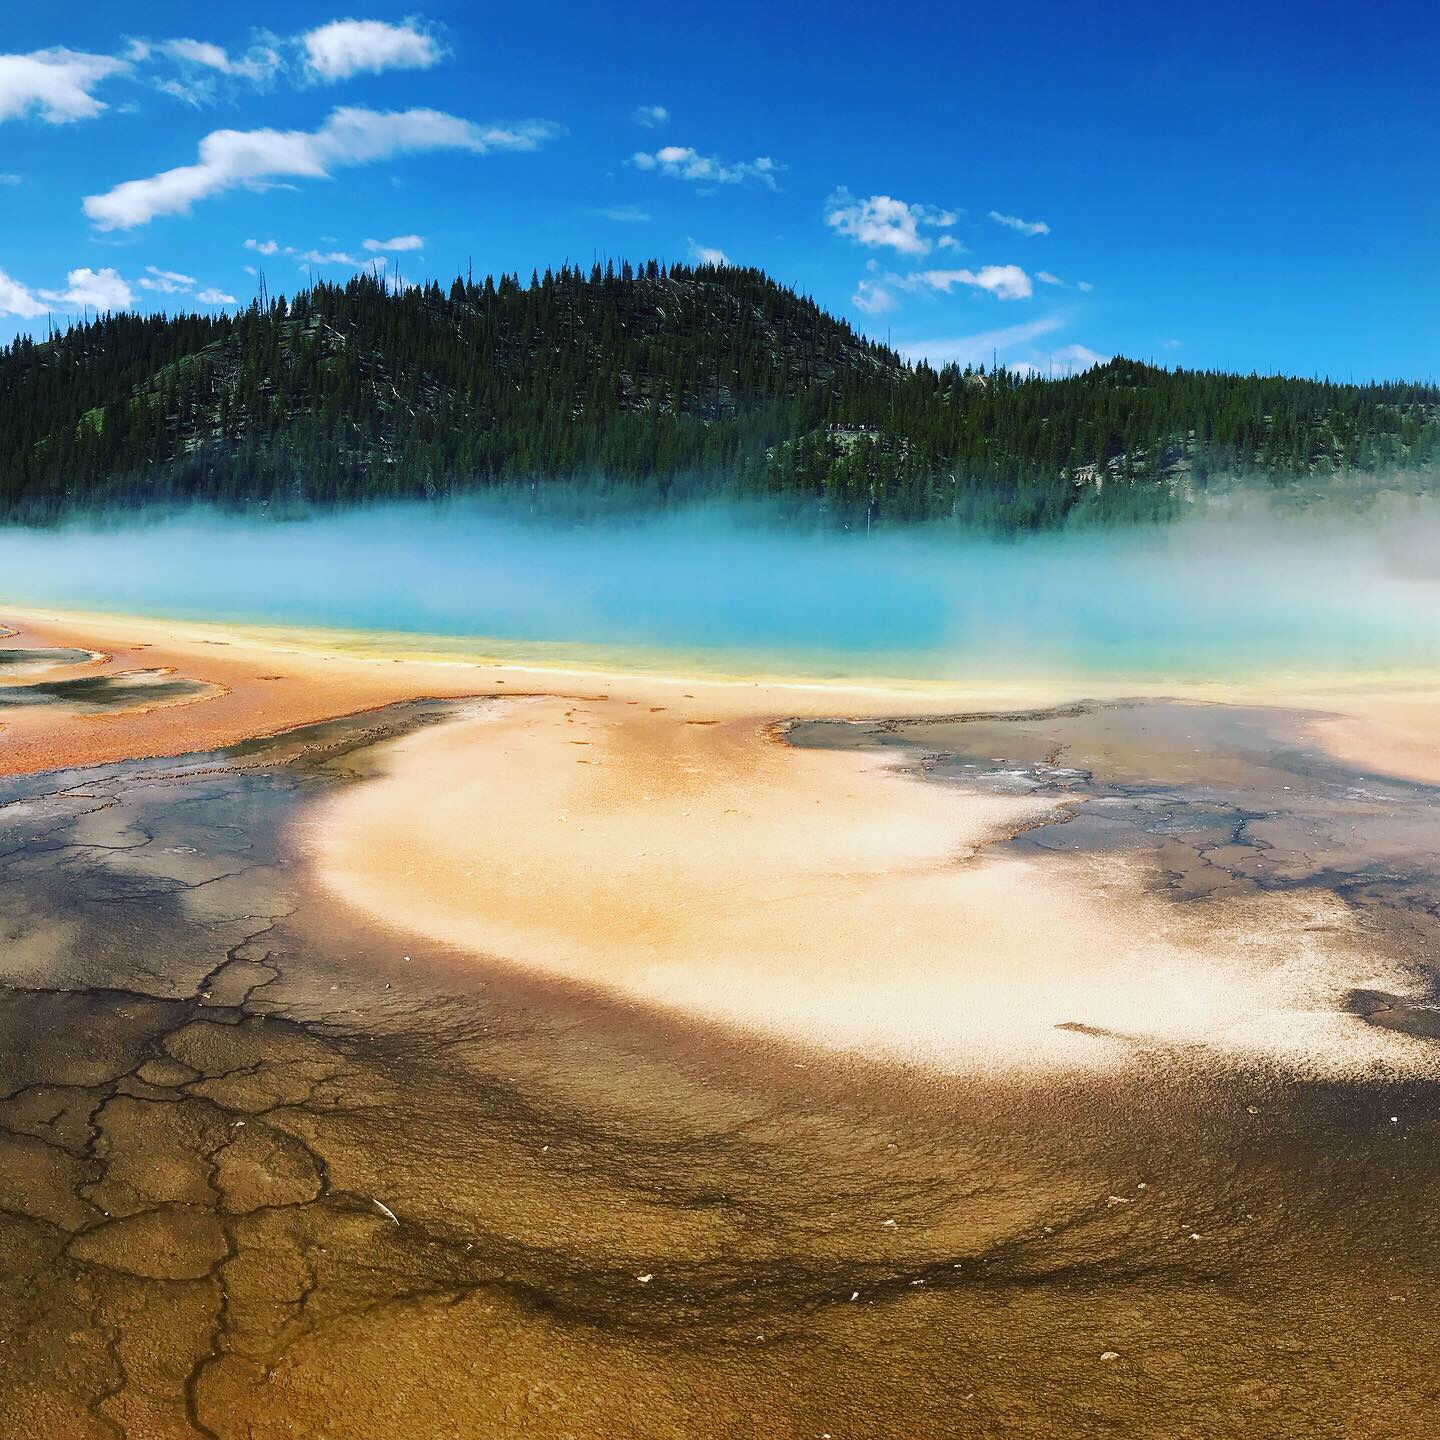 Yellowstone National Park: A Family Adventure with Once in a Lifetime Moments (Itinerary Included)